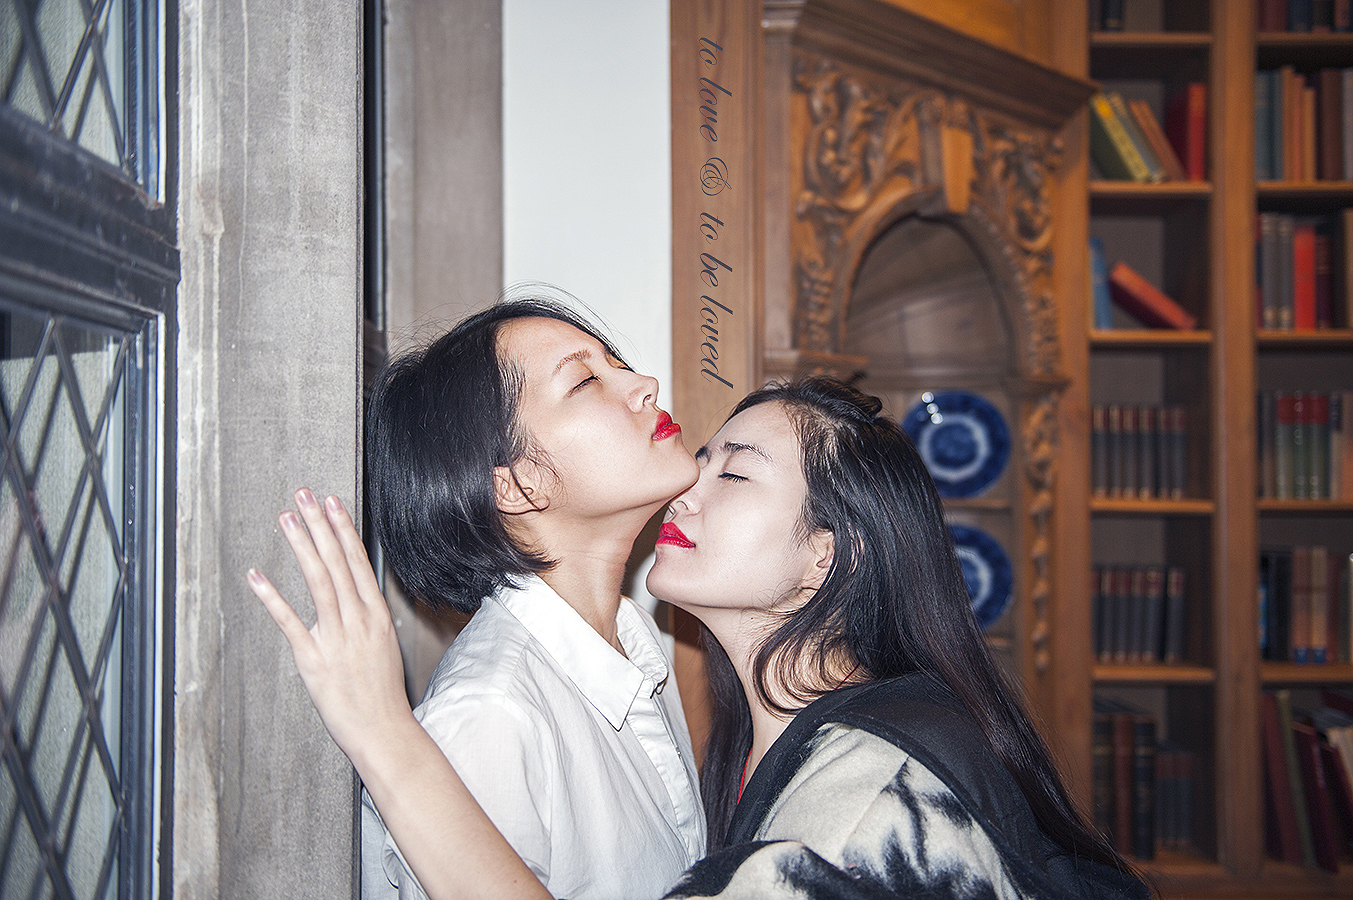  Zhujun_BamBoo_Ding_Assign_4_Branding_to_love_and_to_be_loved_Feminism_LGBT_friendly_Bryn_Mawr_College_UPenn_Fashion_Photography_Tony_Ward_Studio